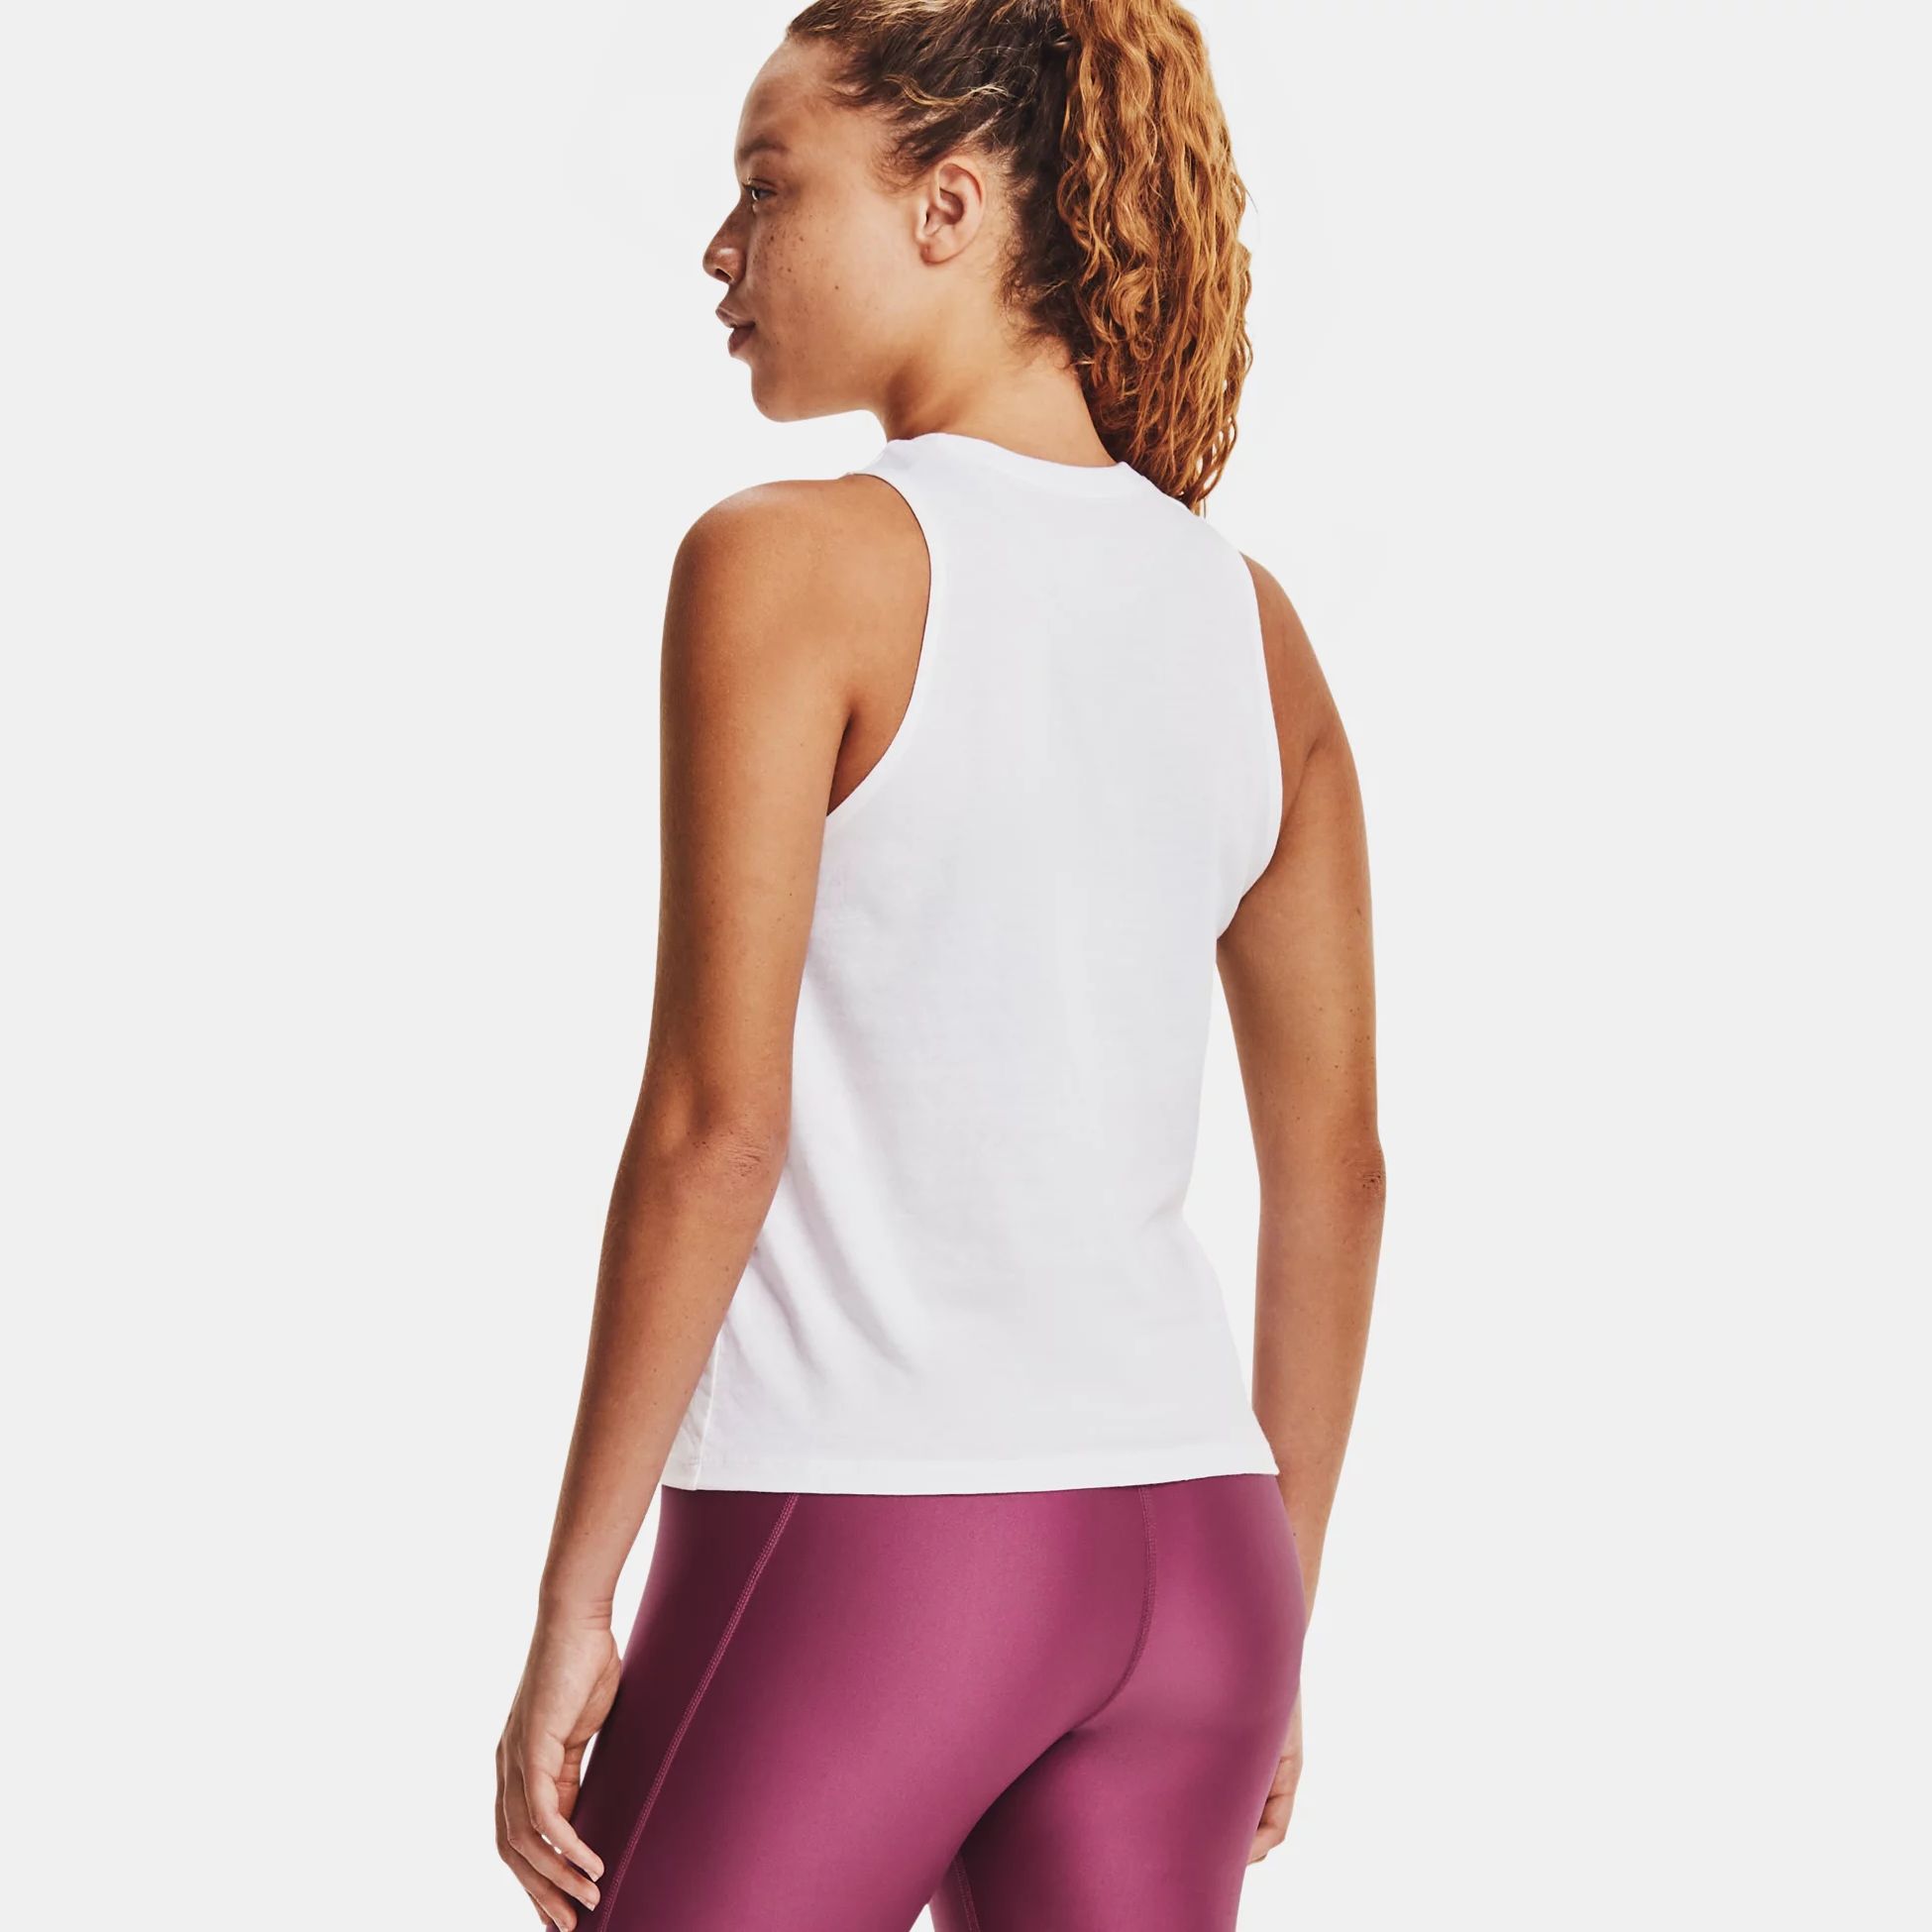 Under Armour Para Mujer Top Step Graphic Classic Crew 